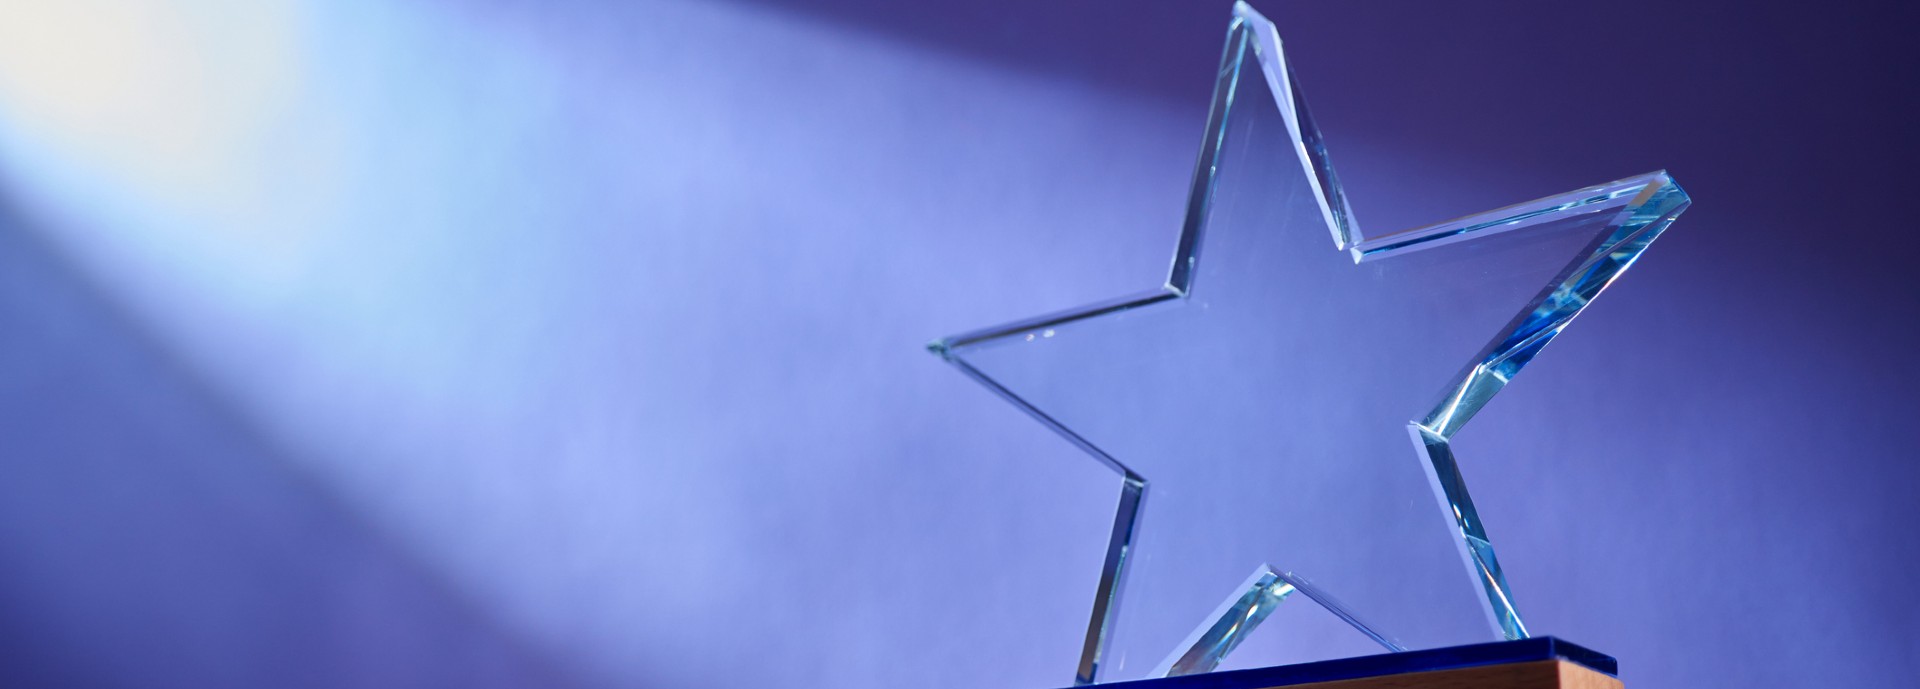 Star shape of crystal trophy against purple background